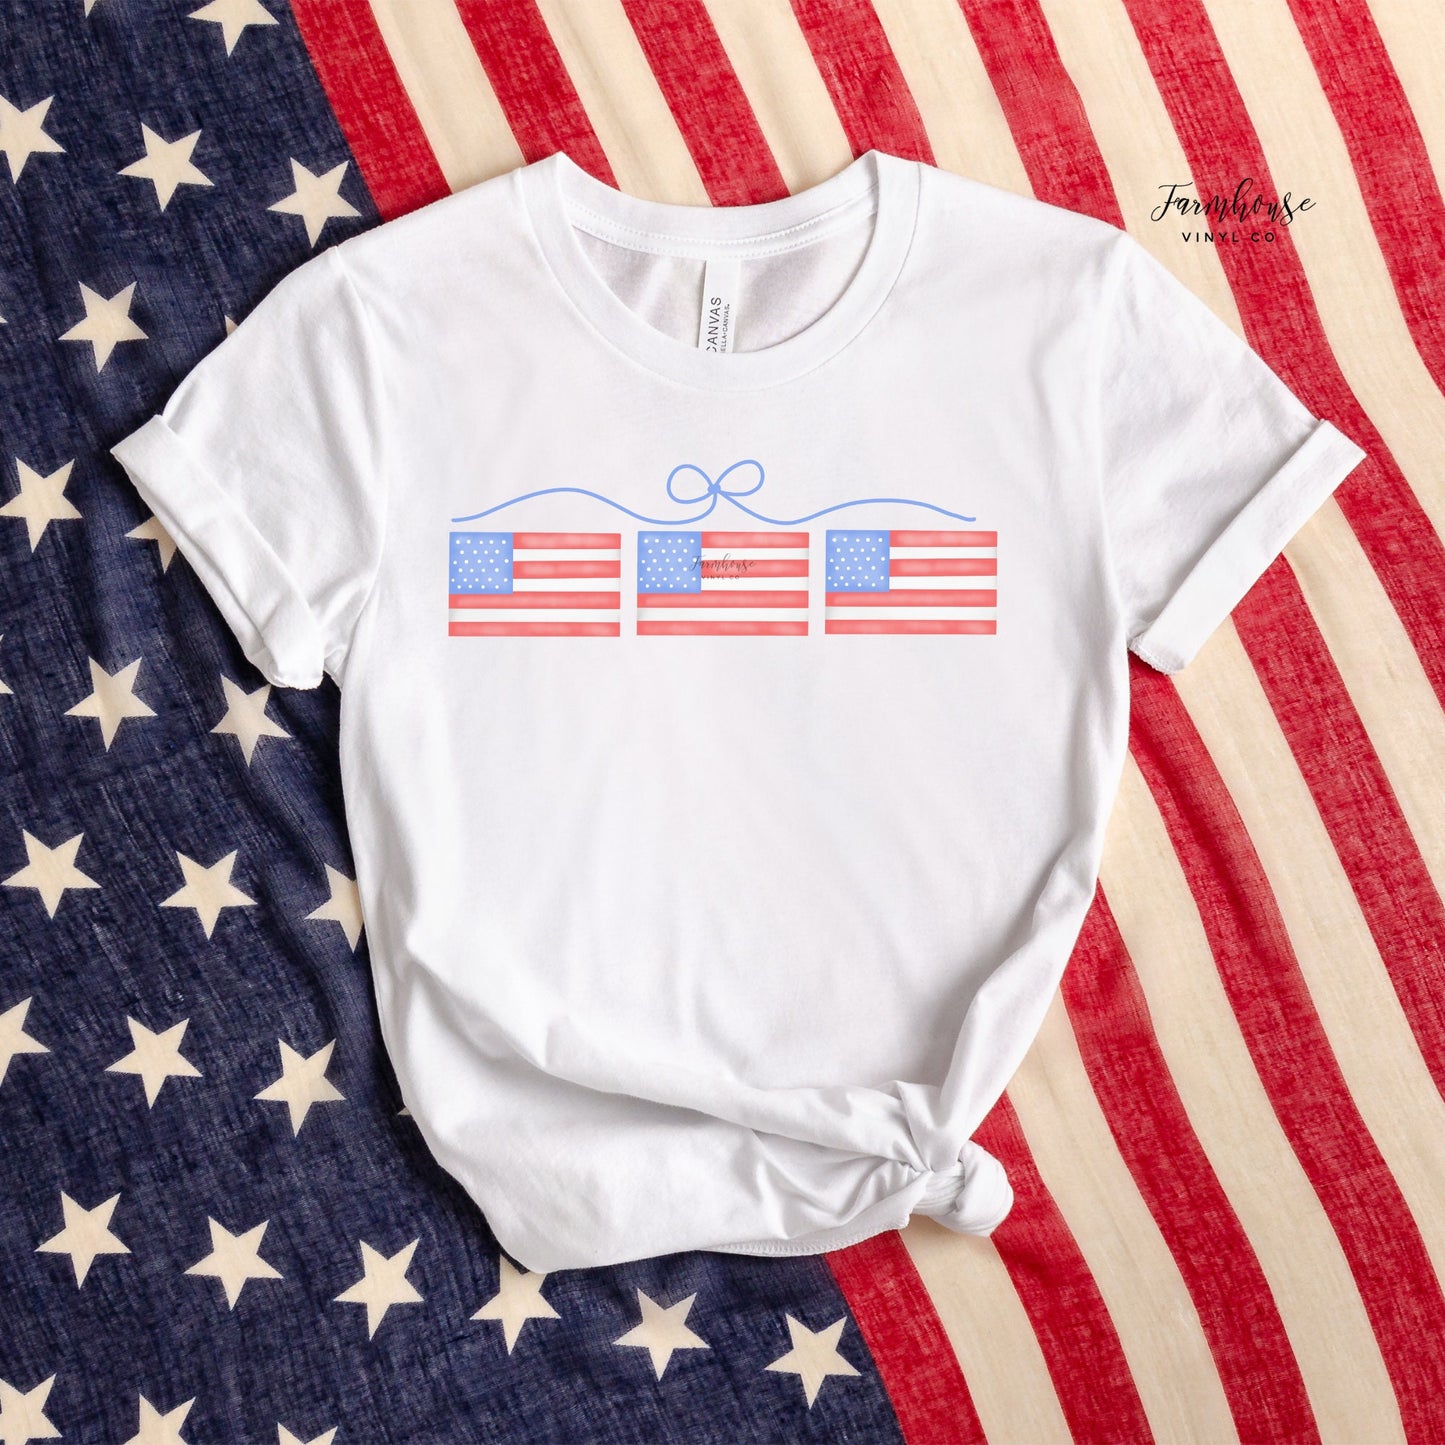 Group 4th of July Shirts - Farmhouse Vinyl Co